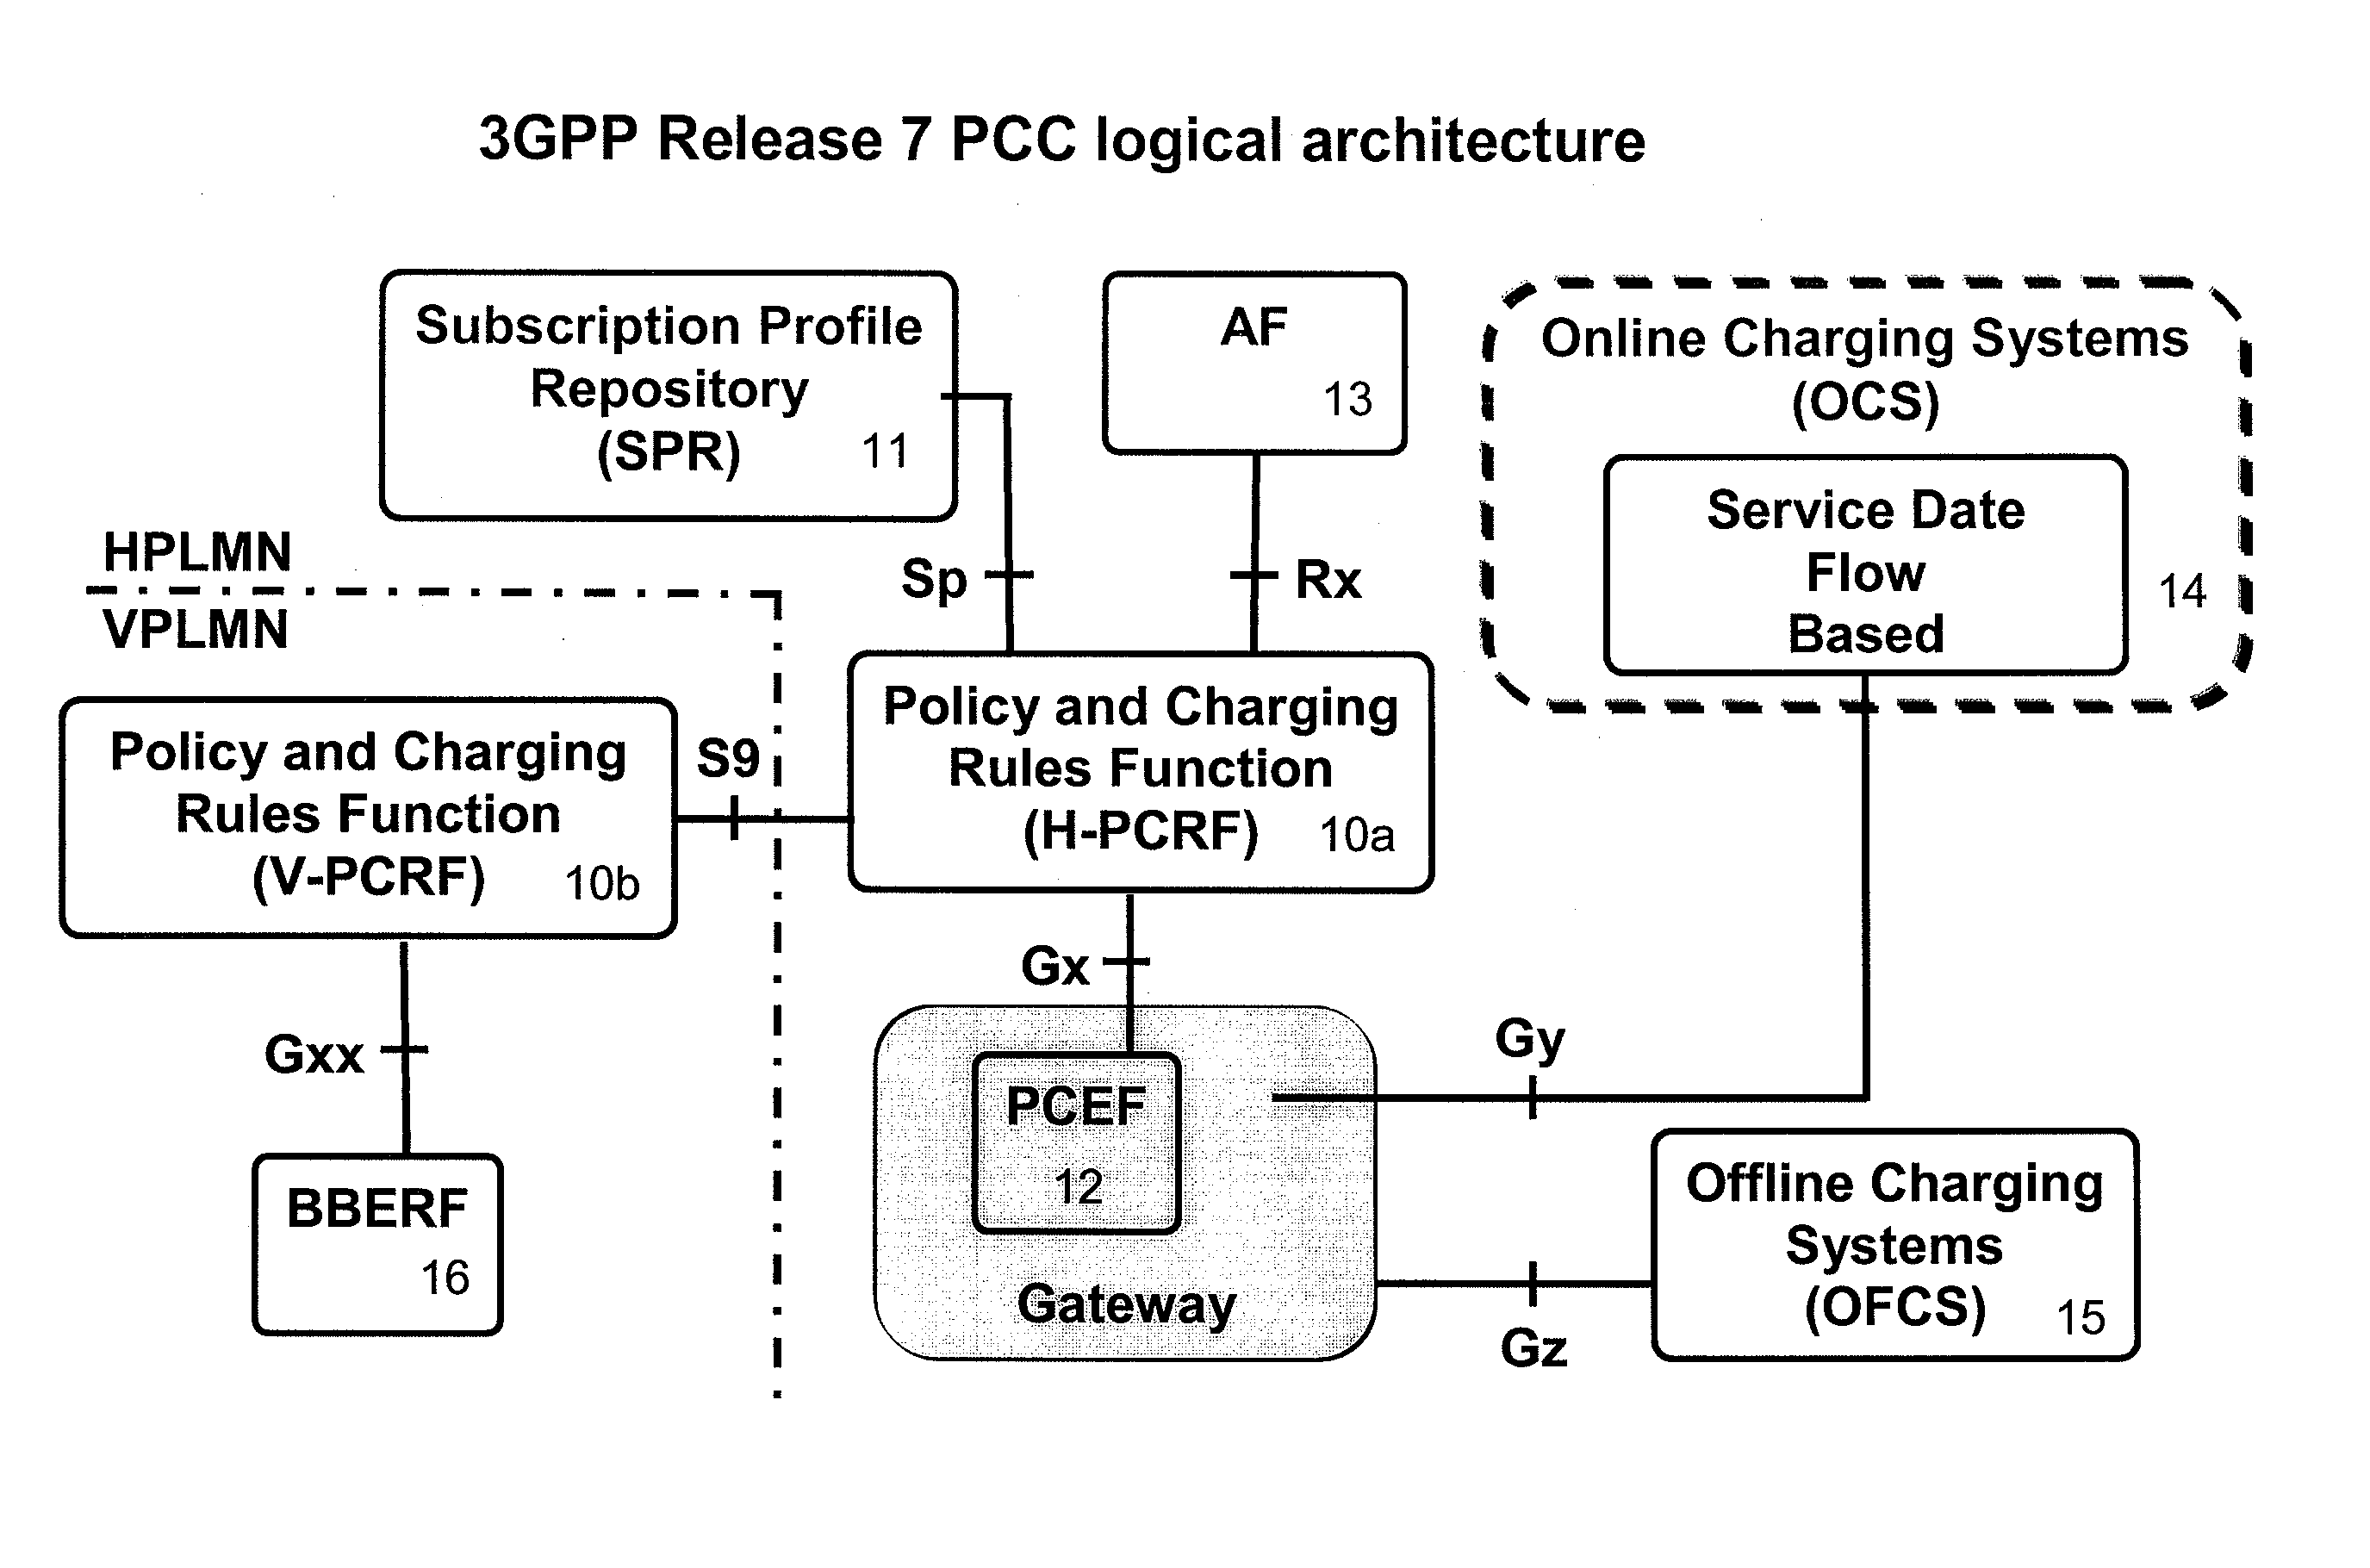 Controlling subscriber usage in a telecommunications network